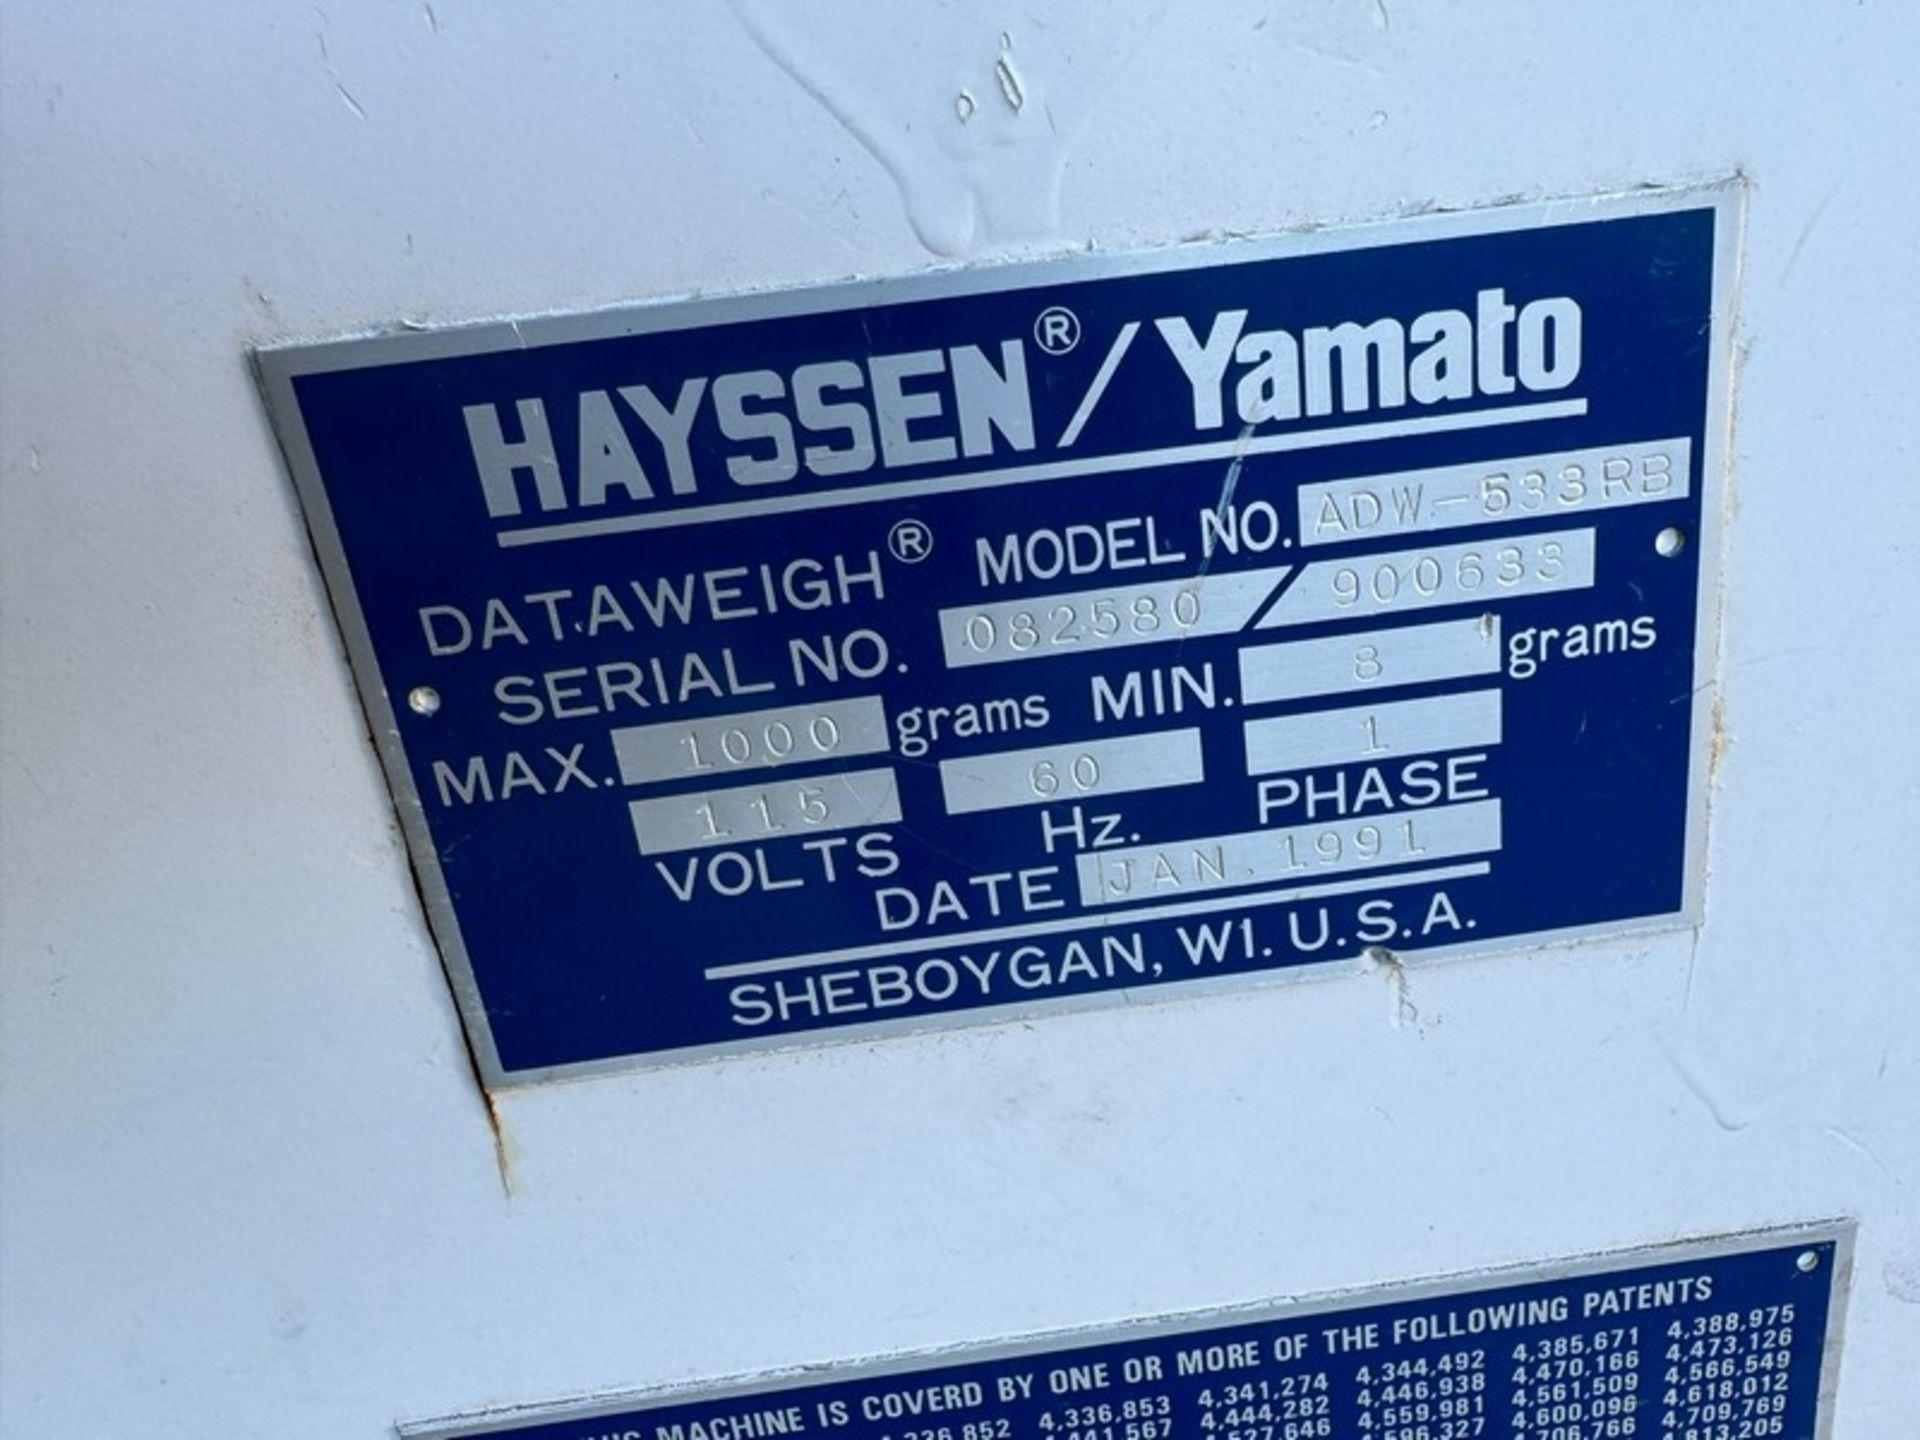 HAYSEEN/Yamato Rotary Scale, M/N ADW-533RB, S/N 082580/900638, MAX. 1000 grams, MIN. 8 grams, 115 Vo - Image 5 of 5